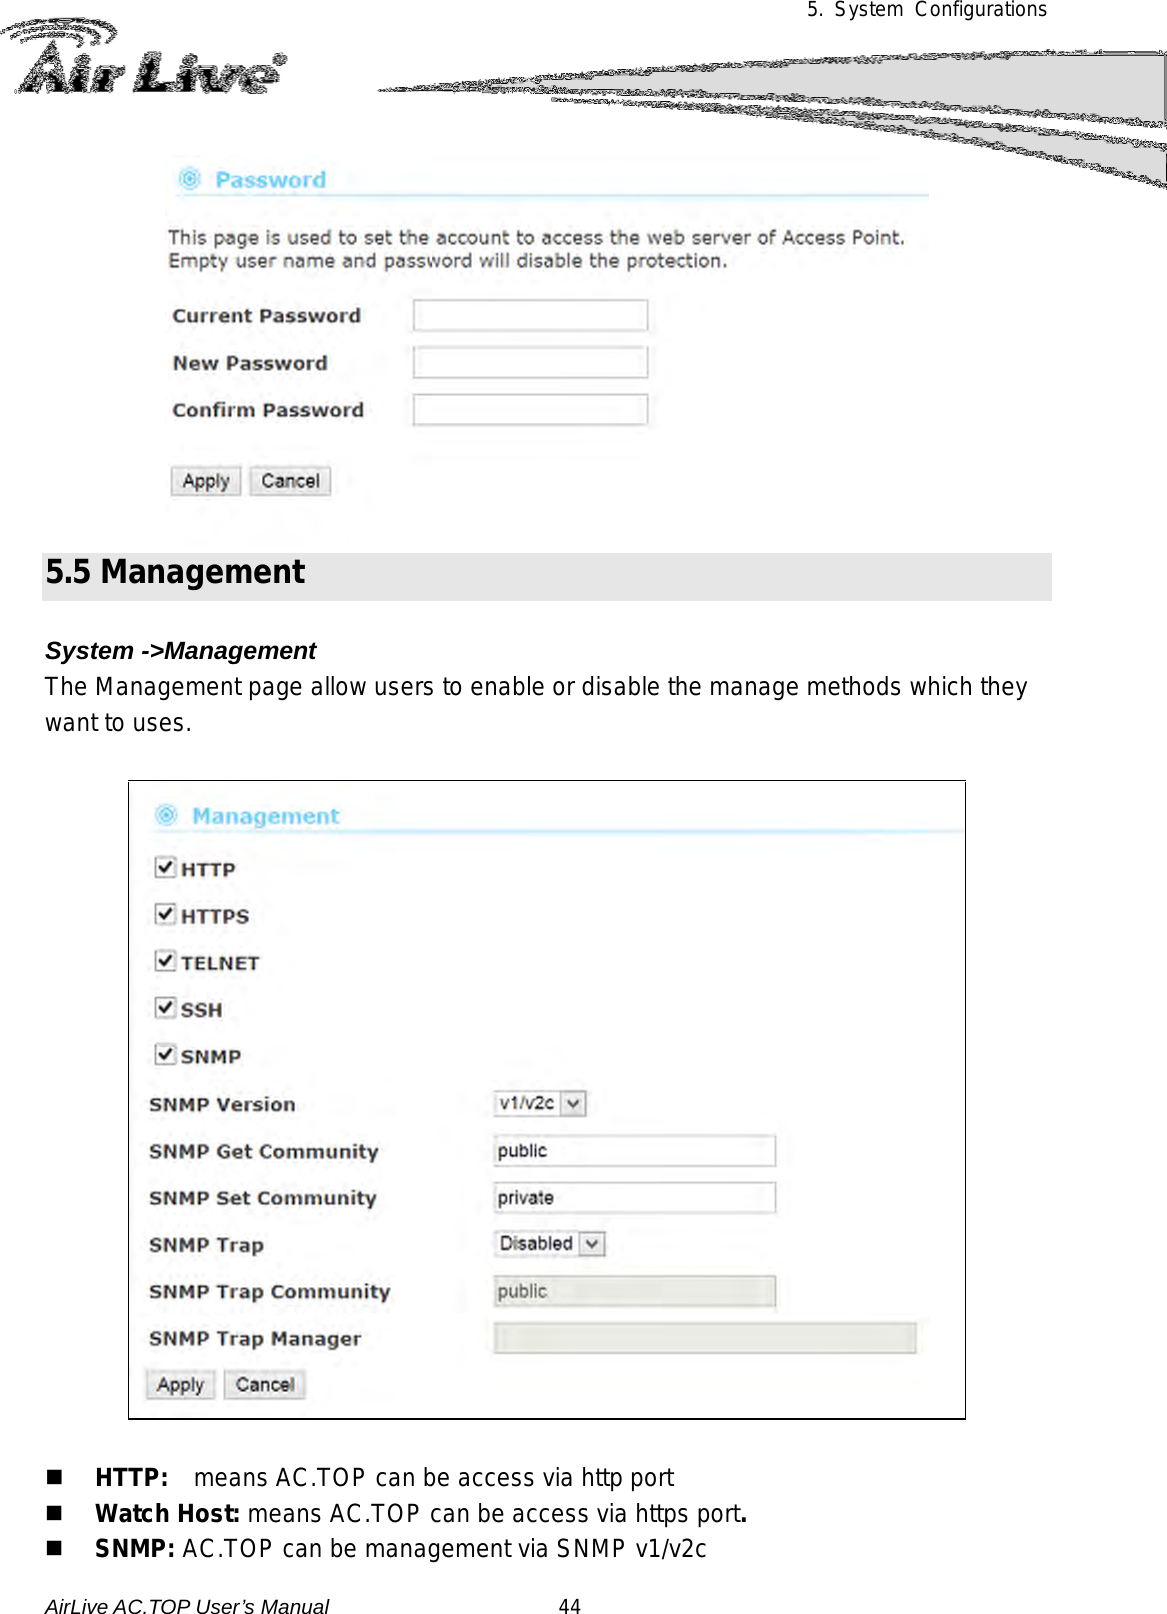 5.  System Configurations   5.5 Management  System -&gt;Management The Management page allow users to enable or disable the manage methods which they want to uses.      HTTP:   means AC.TOP can be access via http port  Watch Host: means AC.TOP can be access via https port.  SNMP: AC.TOP can be management via SNMP v1/v2c AirLive AC.TOP User’s Manual                      44 